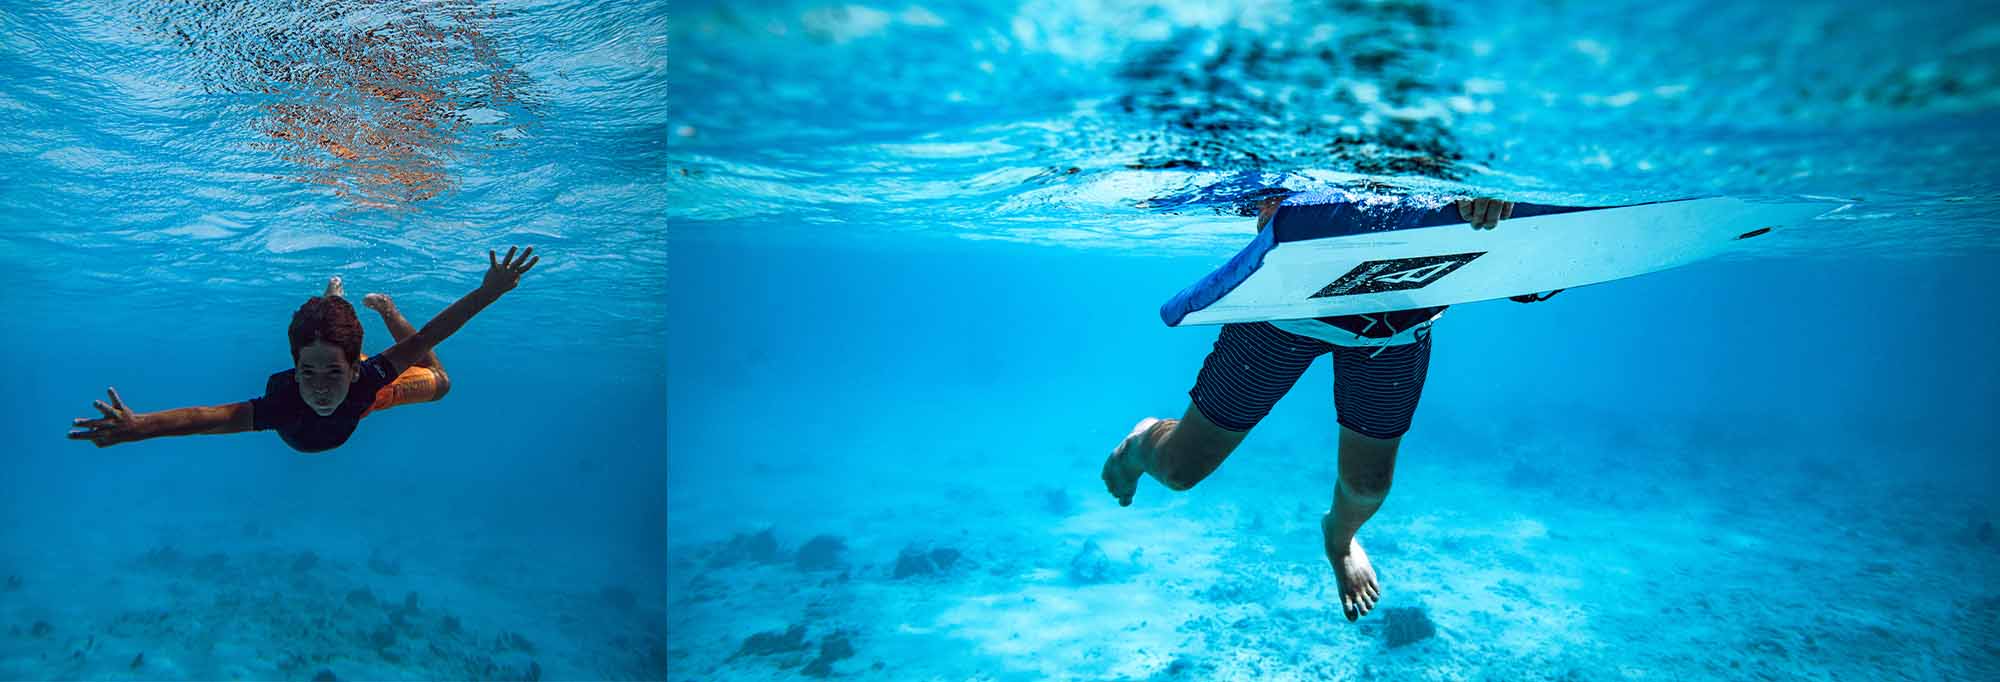 A boy is diving in a bright blue ocean with a Brunotti Rashguard and a Brunotti body board. He is also wearing a Brunotti Swim Short.